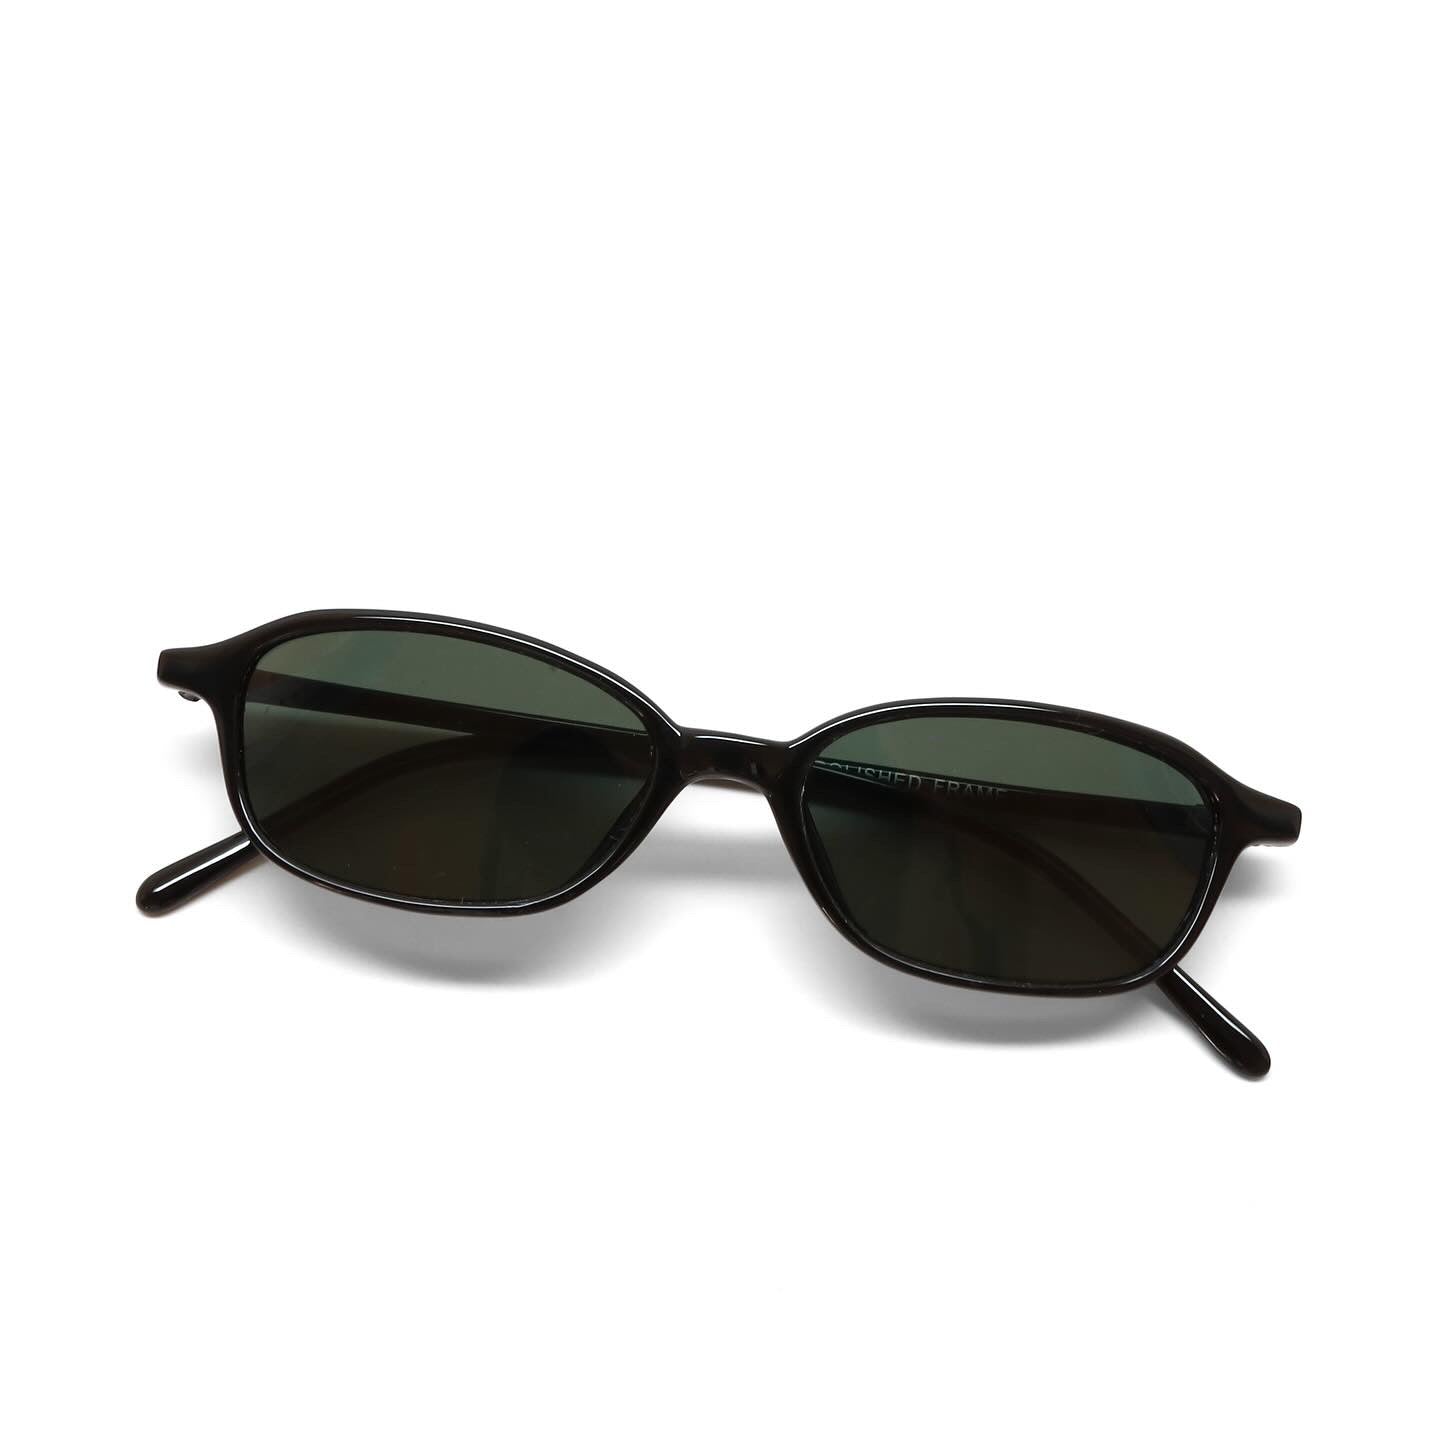 //Style 37// Deluxe Vintage 90s Deadstock Small Chic Oval Sunglasses - Black